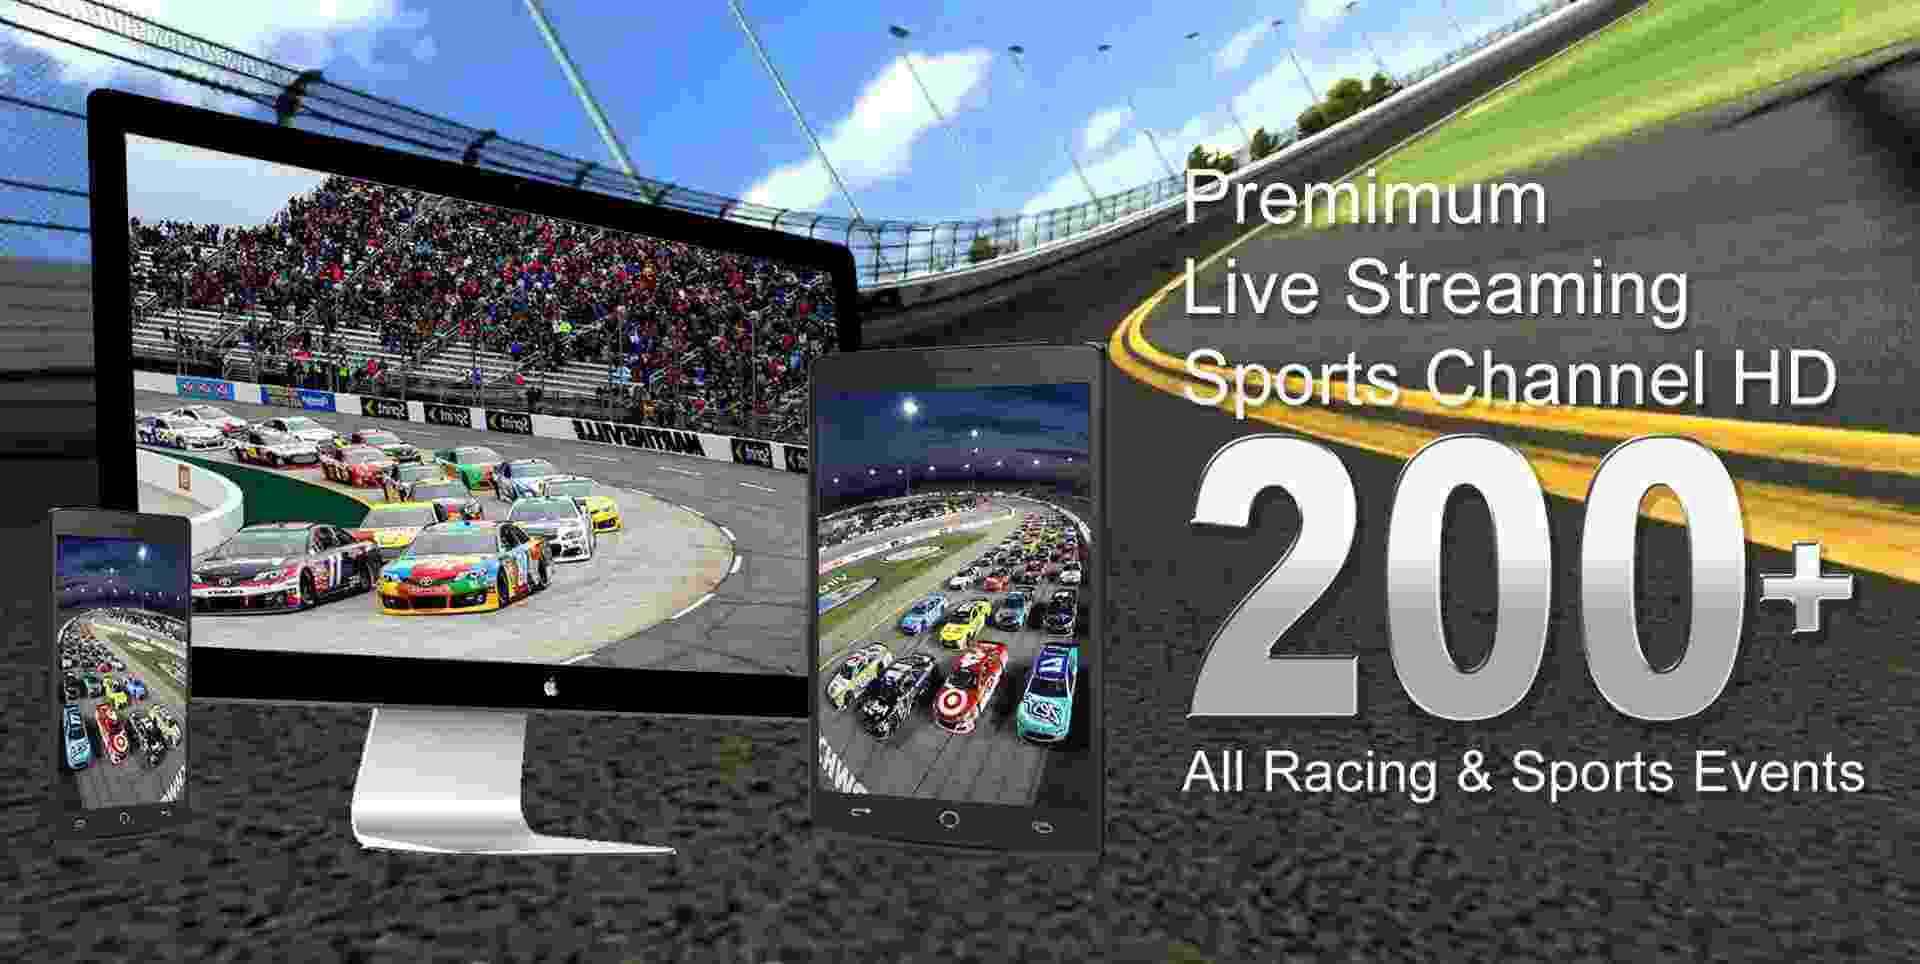 2018 Alpha Energy Solutions 250 Truck Series Live